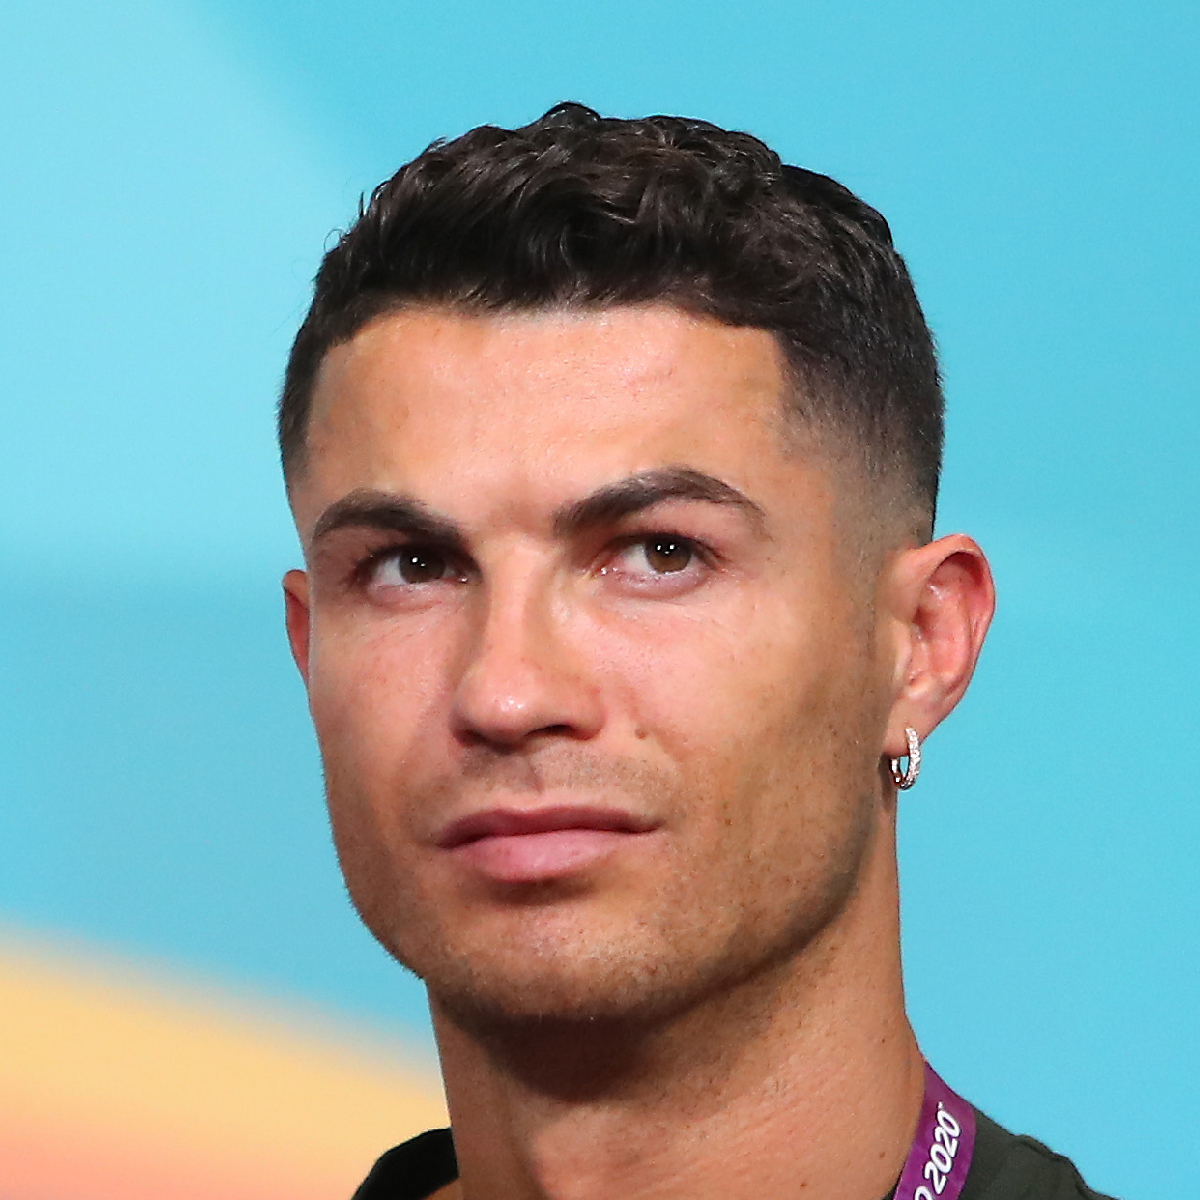 Most-Iconic-Cristiano-Ronaldo-Hairstyles. - Mens Hairstyle 2020